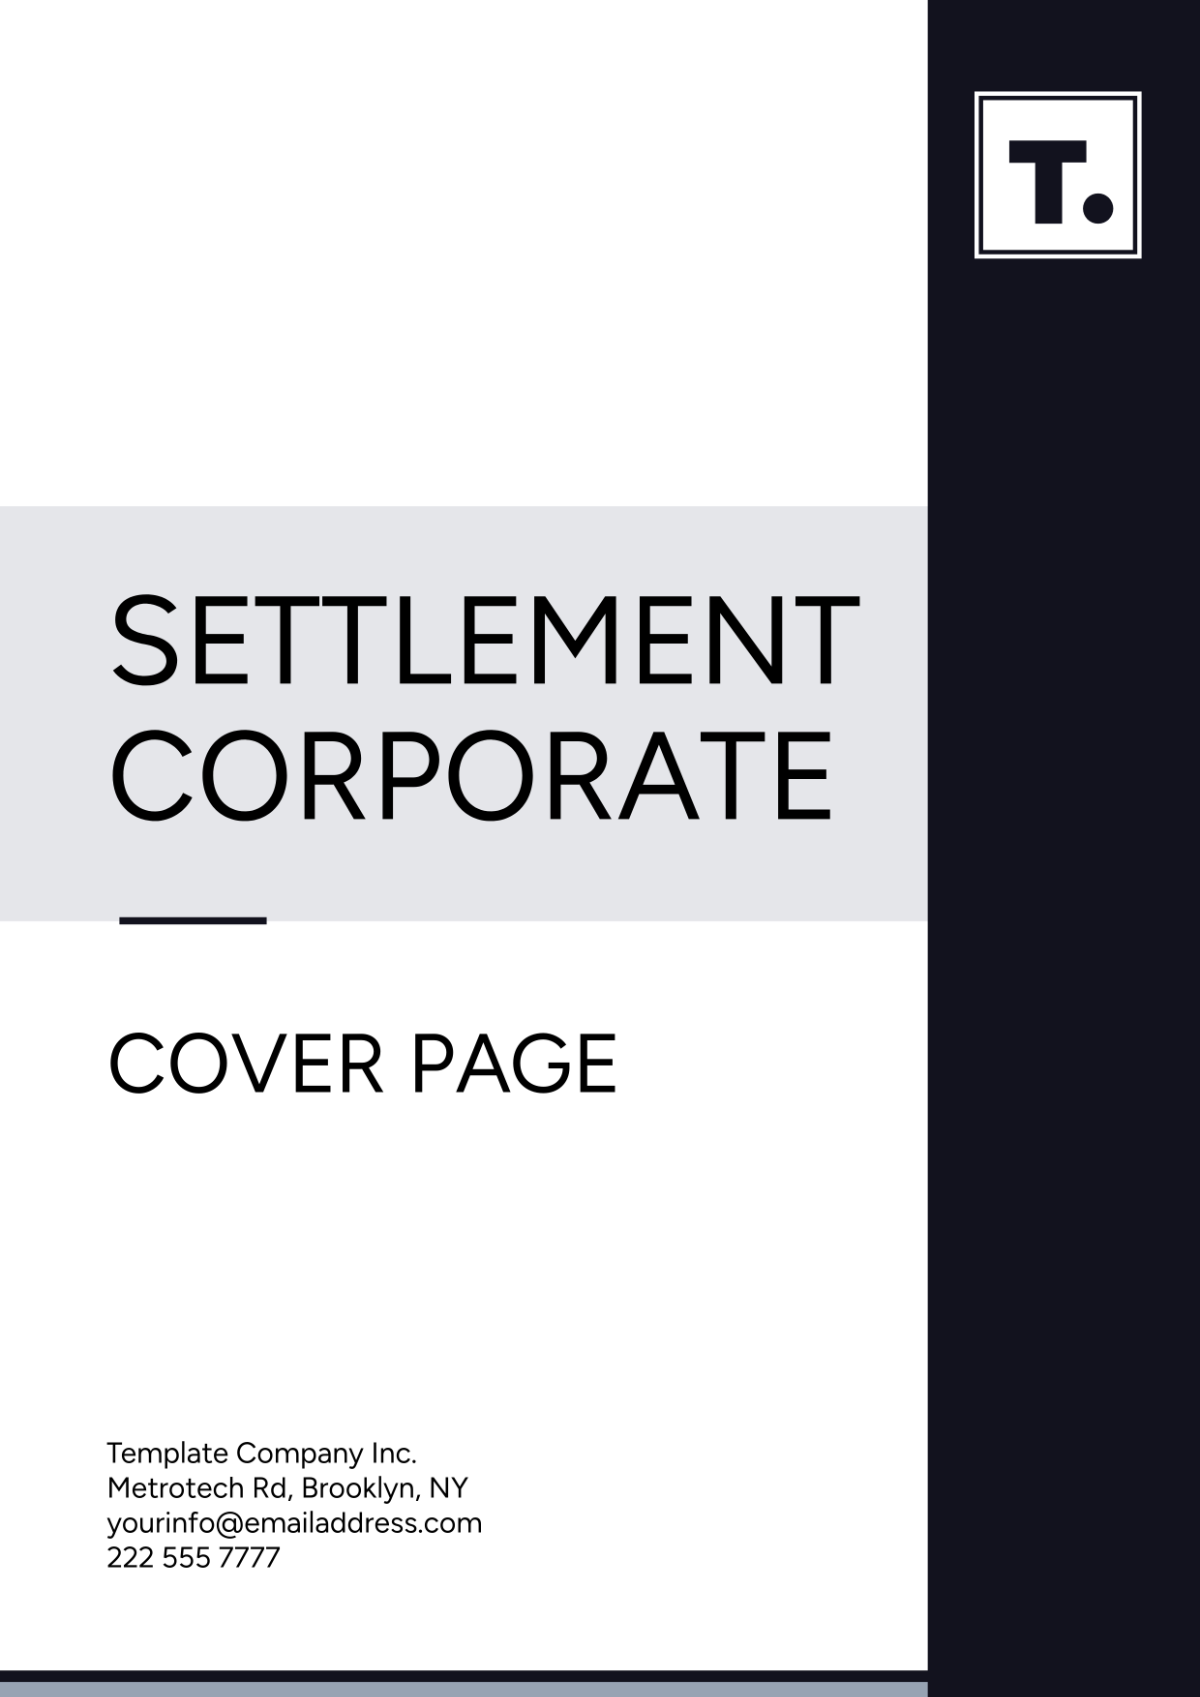 Settlement Corporate Cover Page